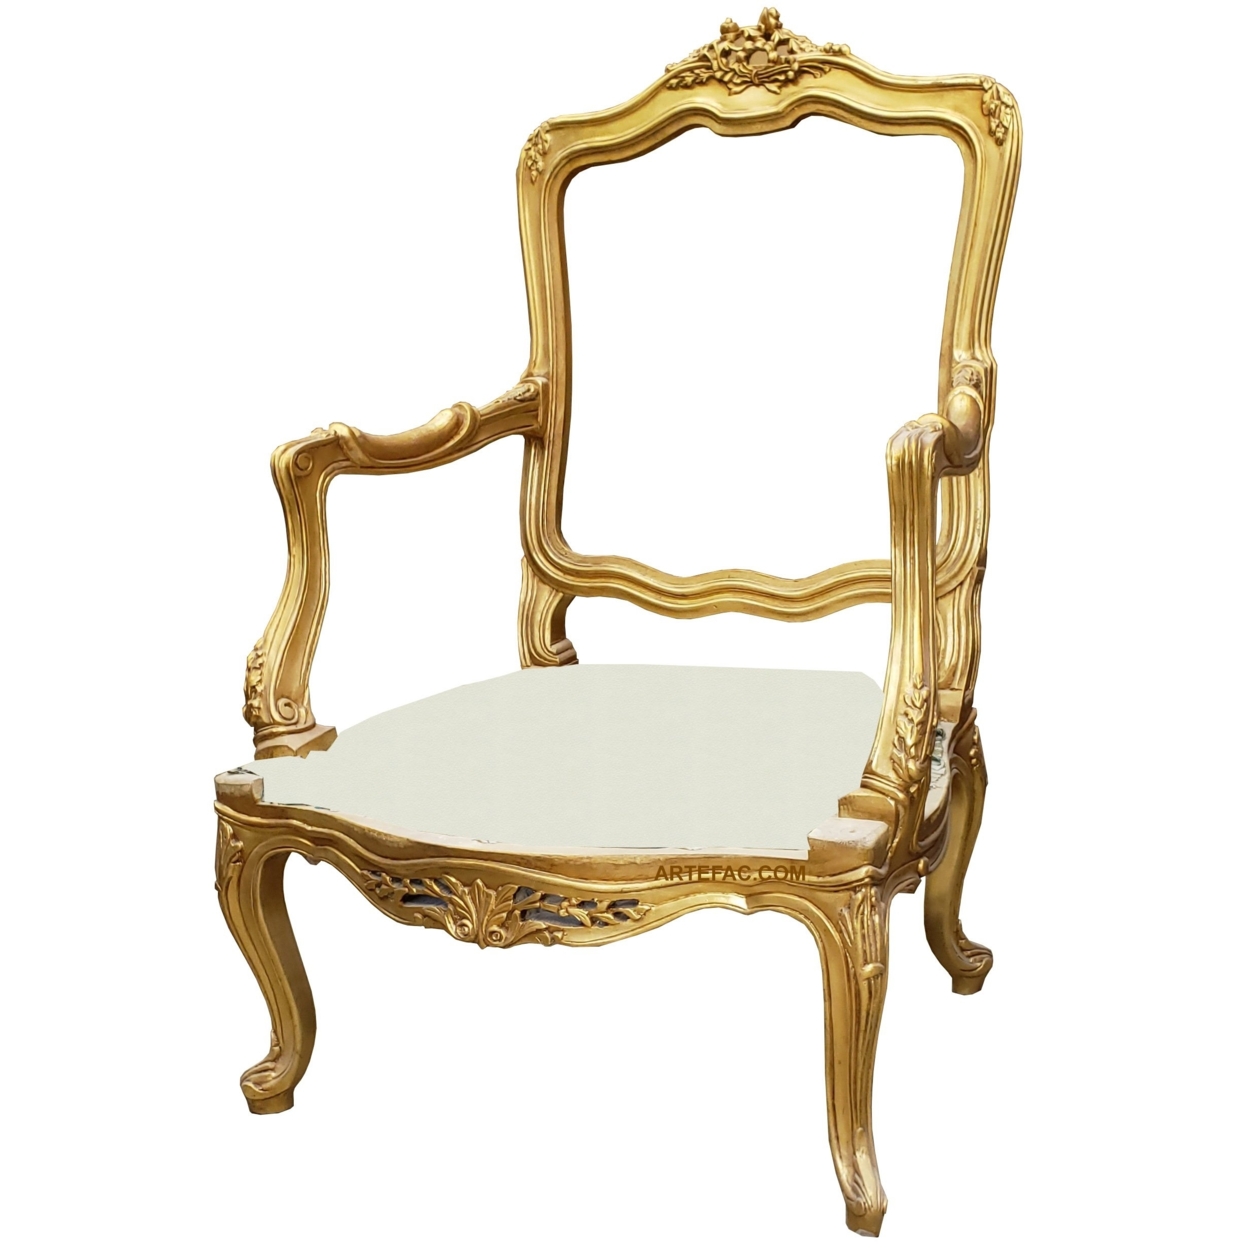 Arabian Style Gold Frame Arm Chair, Reupholstered in Fabric or Leather